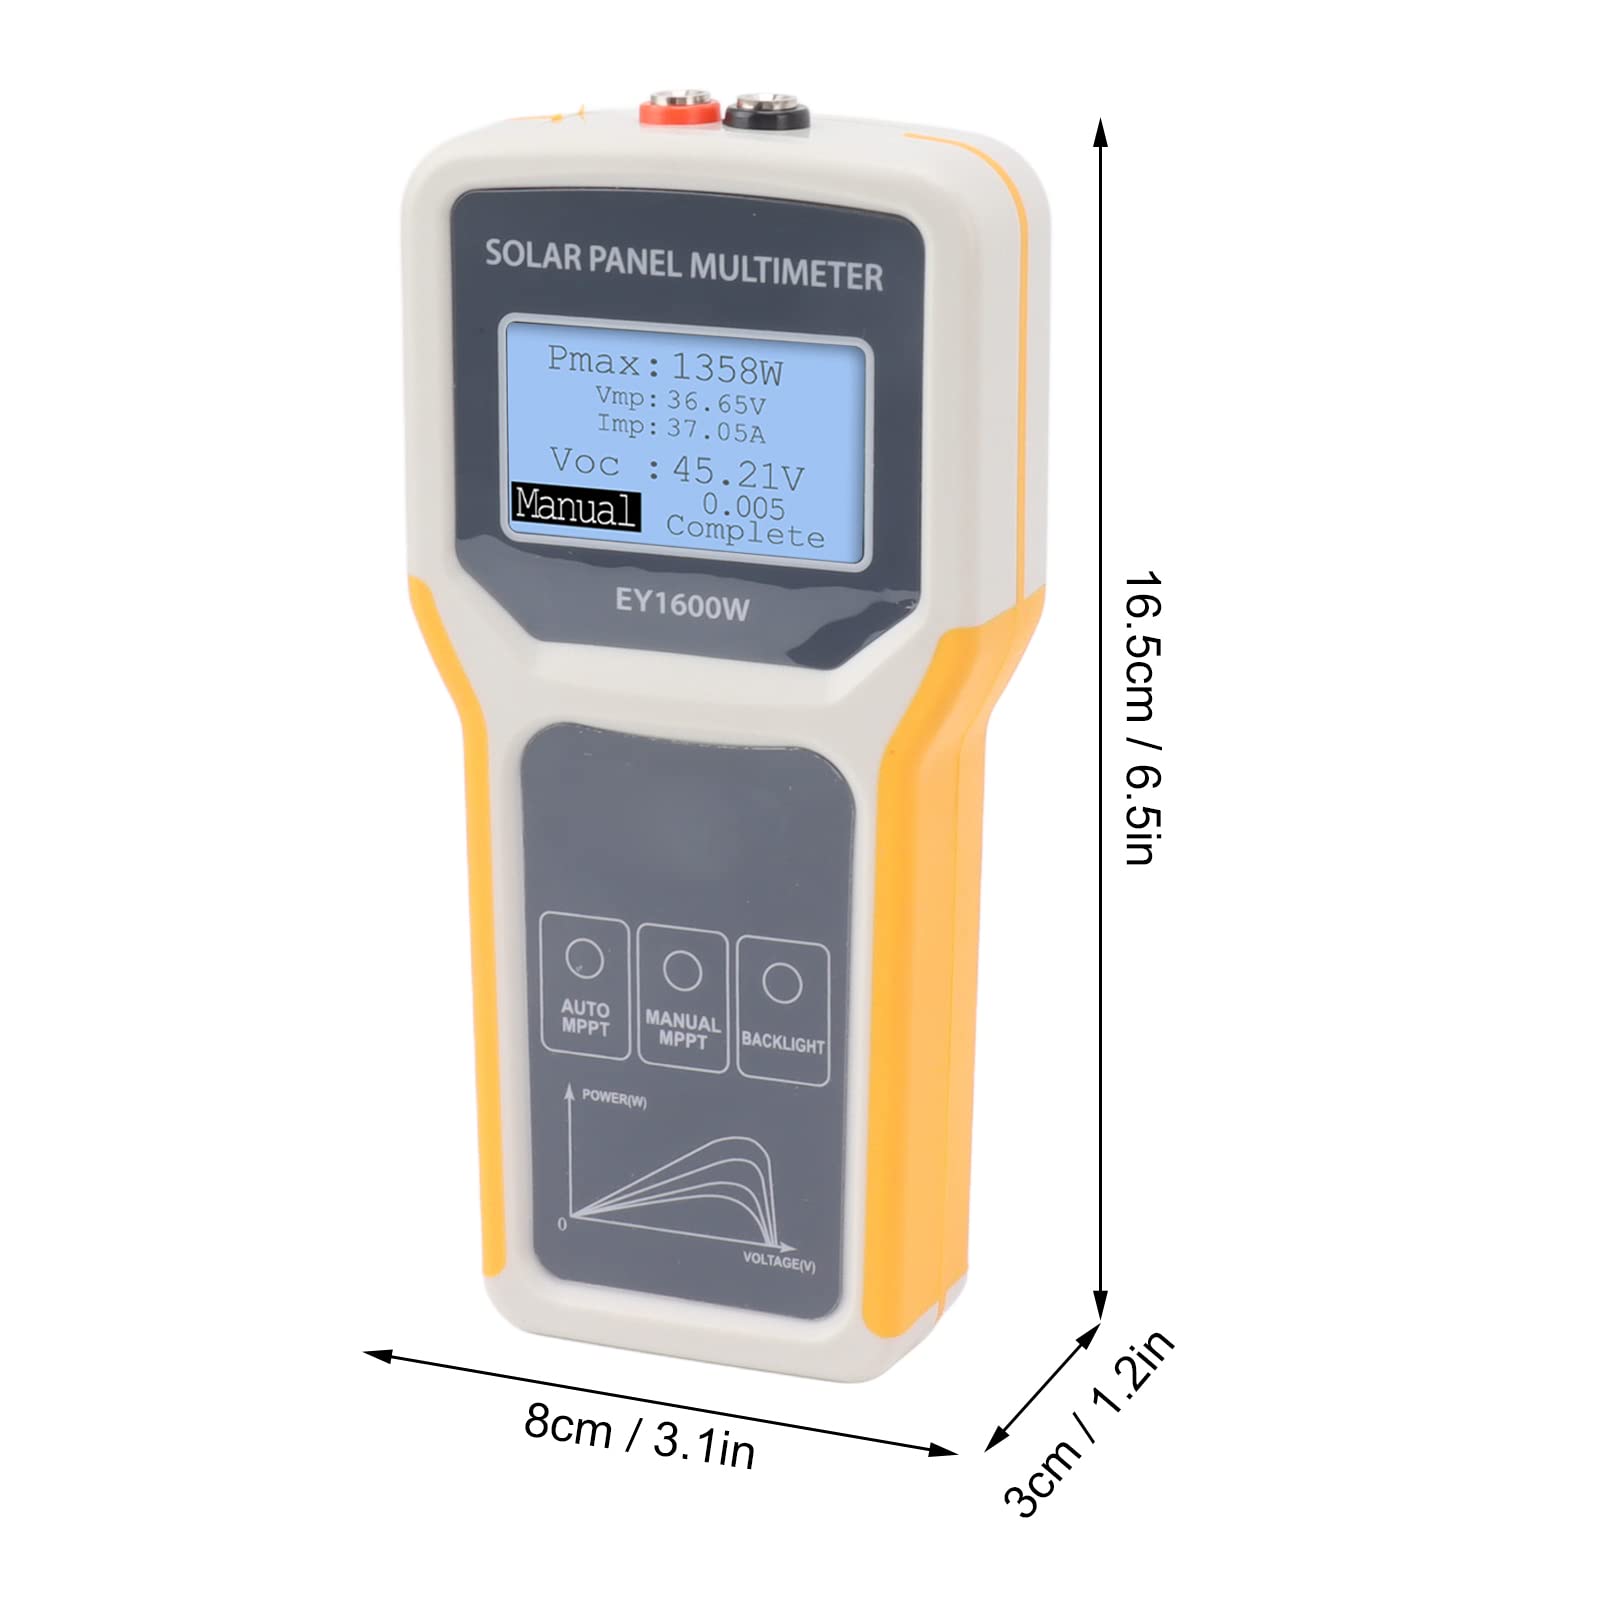 Solar Panel Tester Photovoltaic, 1600W Multimeter Portable Insulation Tester with Ultra Clear LCD Clear Backlight Photovoltaic Panel Multimeter for Laboratories Factories Radio Enthusiasts